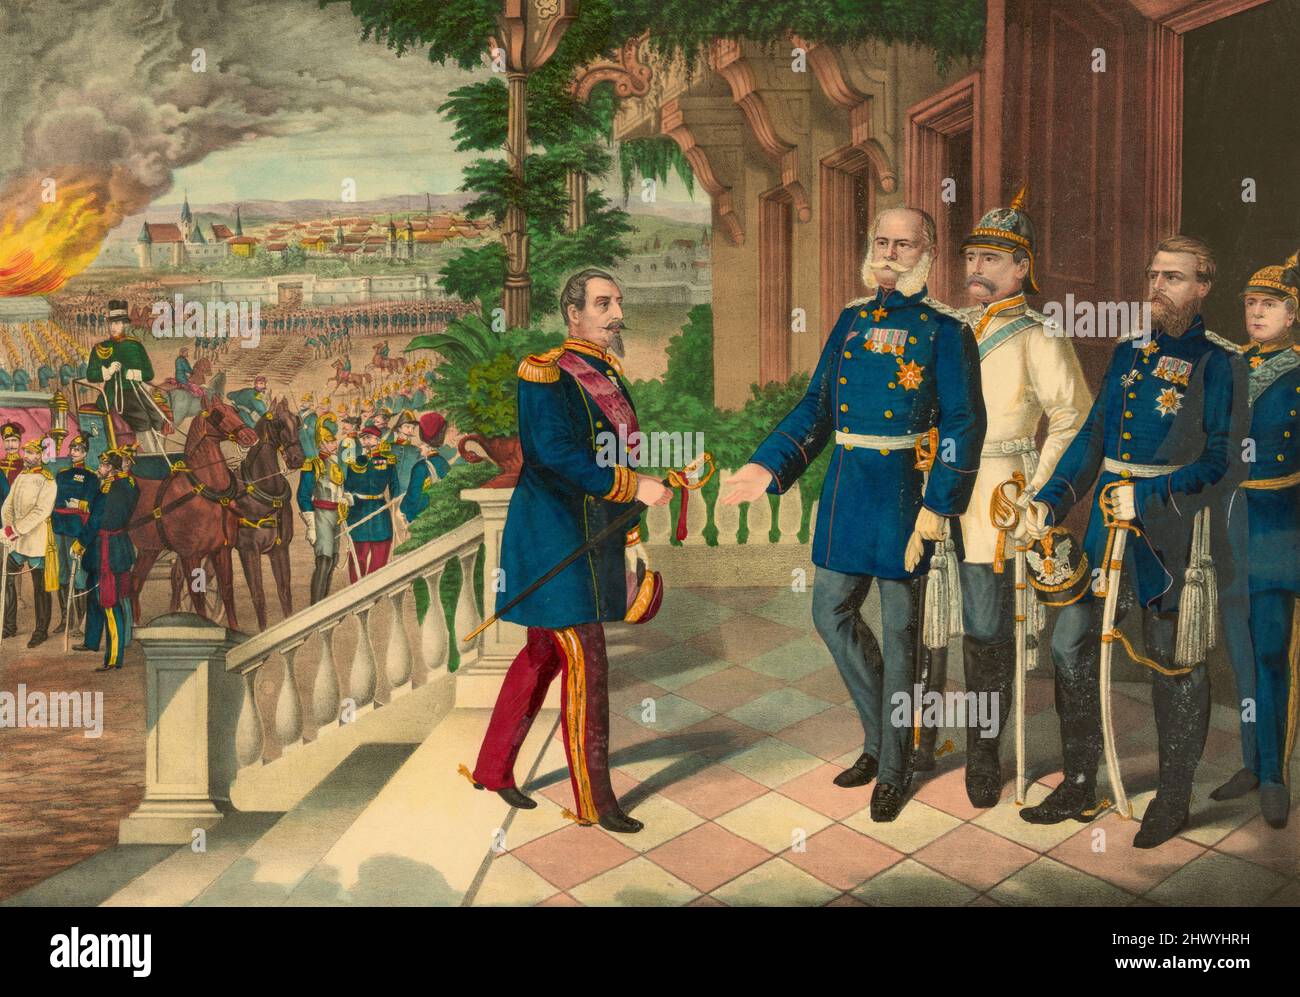 The surrender of Emperor of the French Napoleon III to the Prussians after the Battle of Sedan during the Franco-Prussian War aka Franco-German War of 1870. Louis-Napoléon Bonaparte, 1808 –1873. The only president (1848–52) of the French Second Republic and, as Napoleon III, the Emperor (1852–70) of the Second French Empire.  In the picture Napoleon presents his sword to King Wilhelm I (William I), King of Prussia. Stock Photo